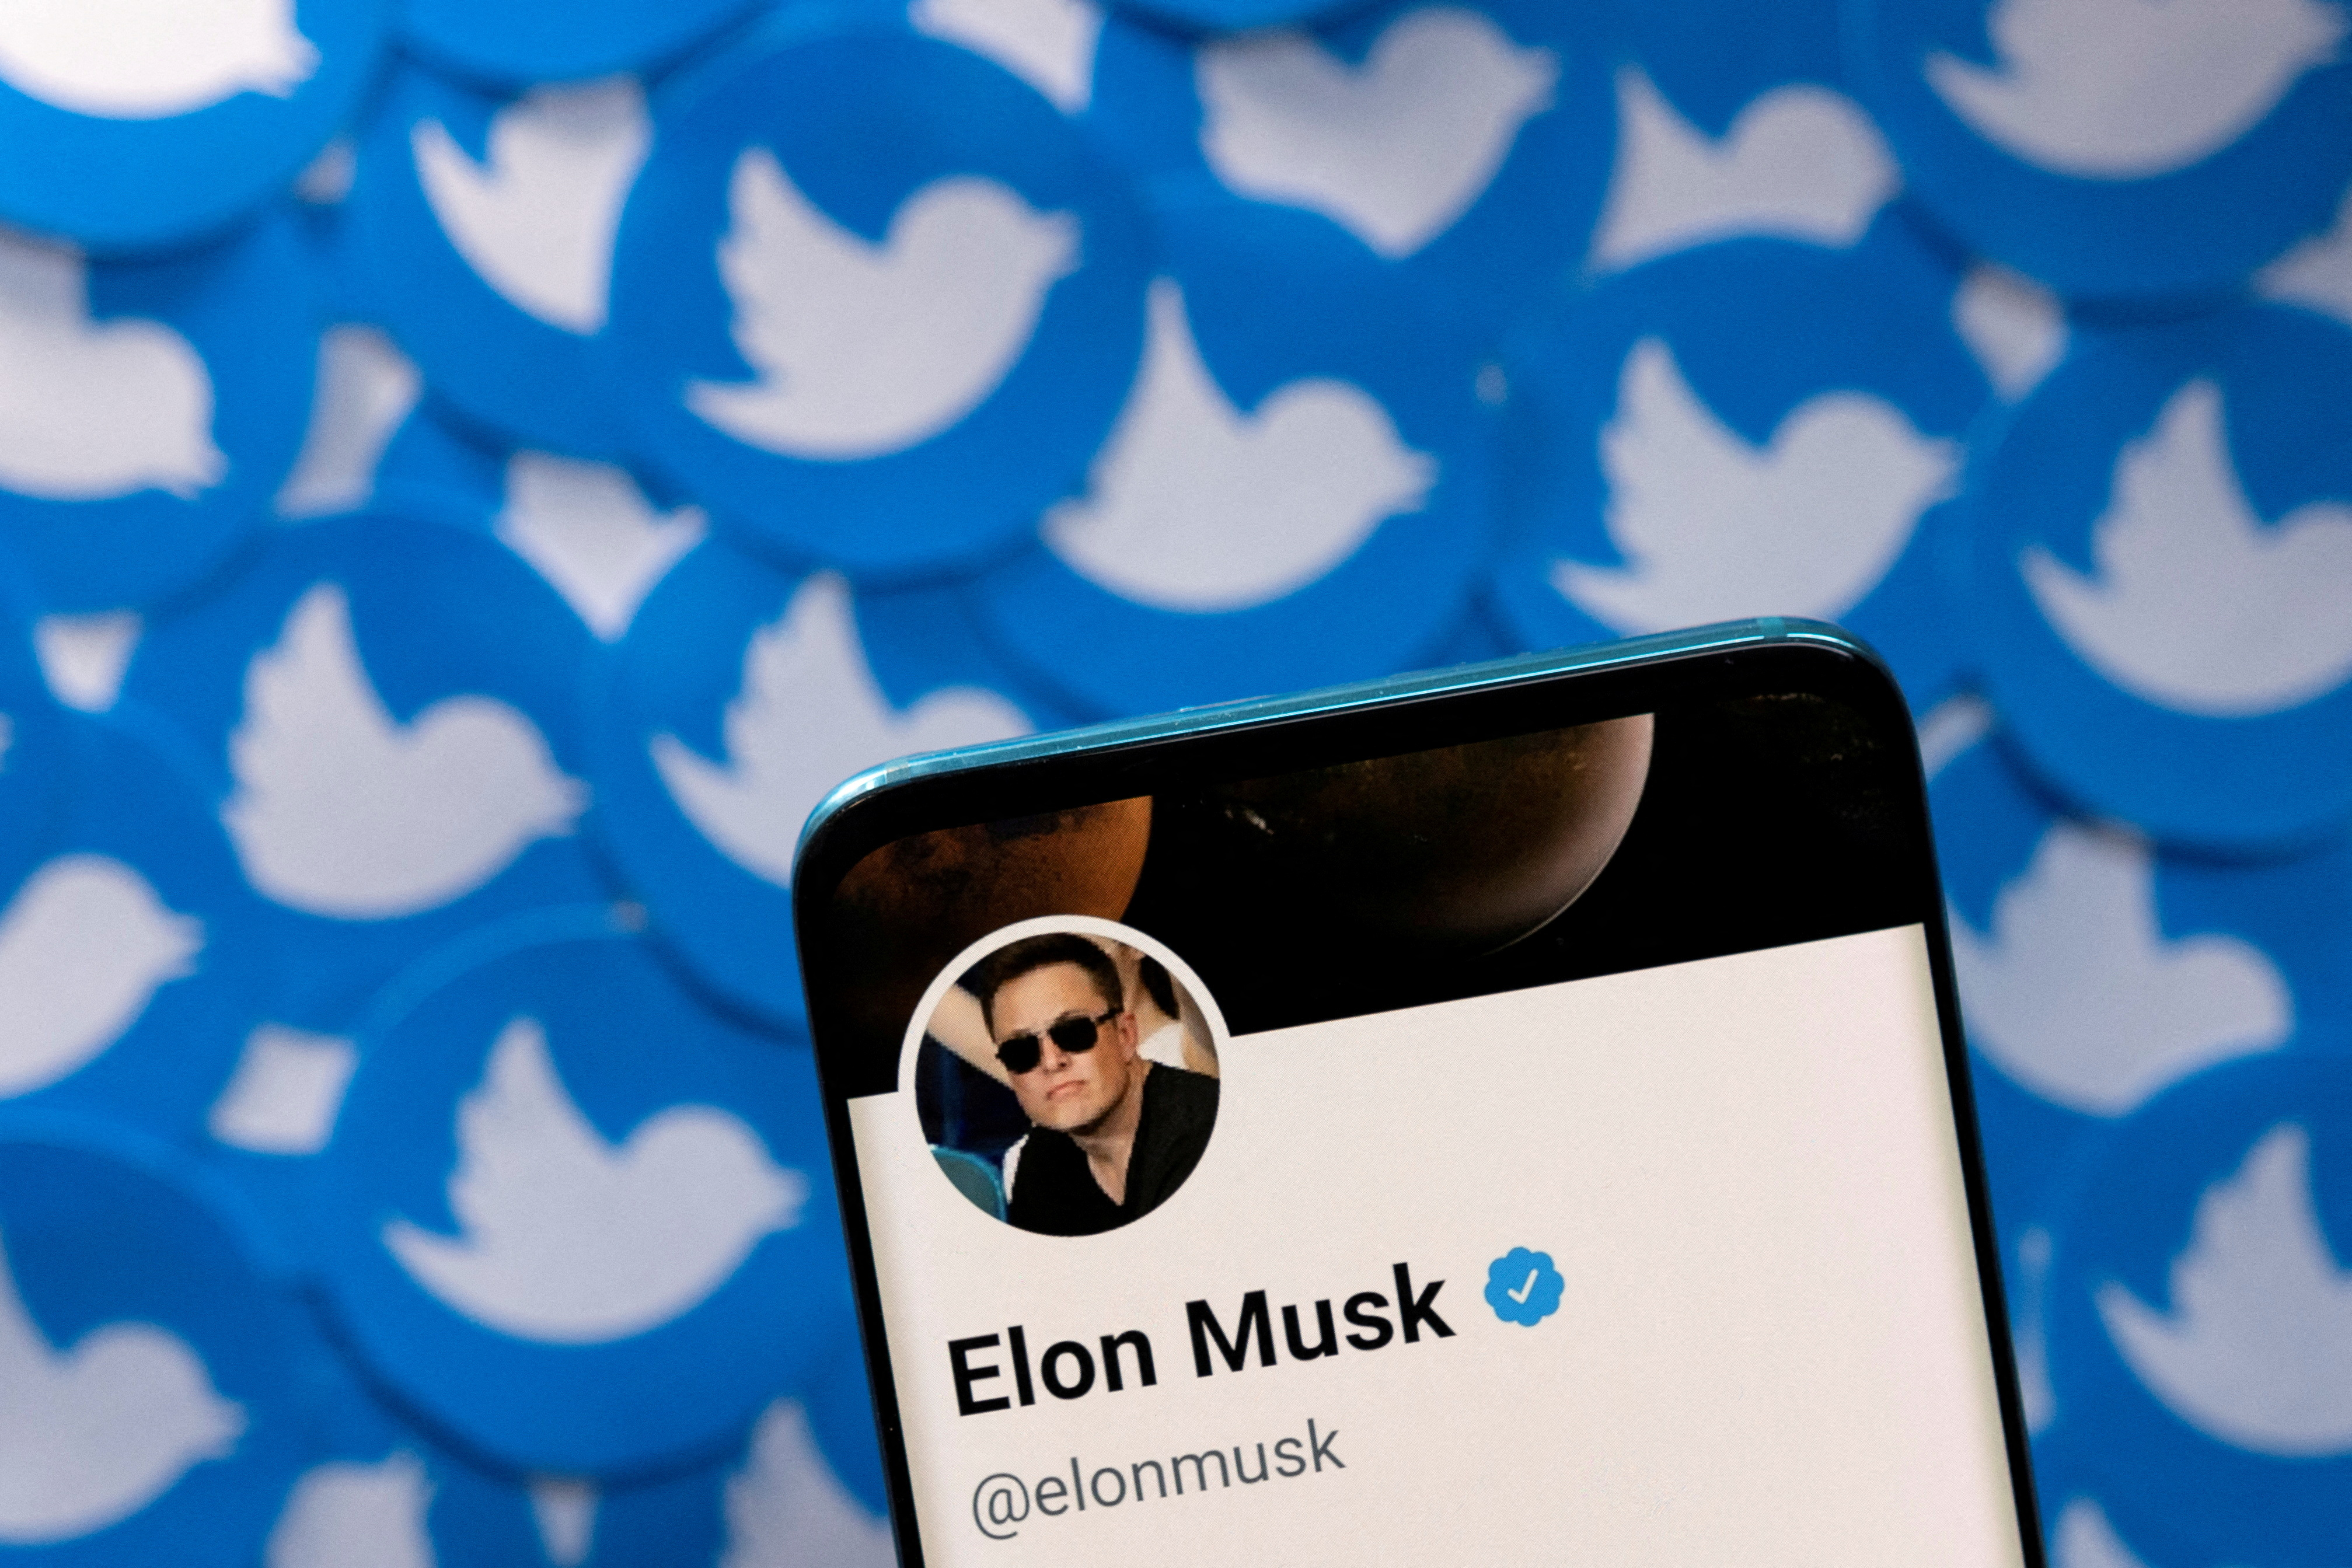 image Twitter shares to be suspended on NYSE as Musk nears takeover